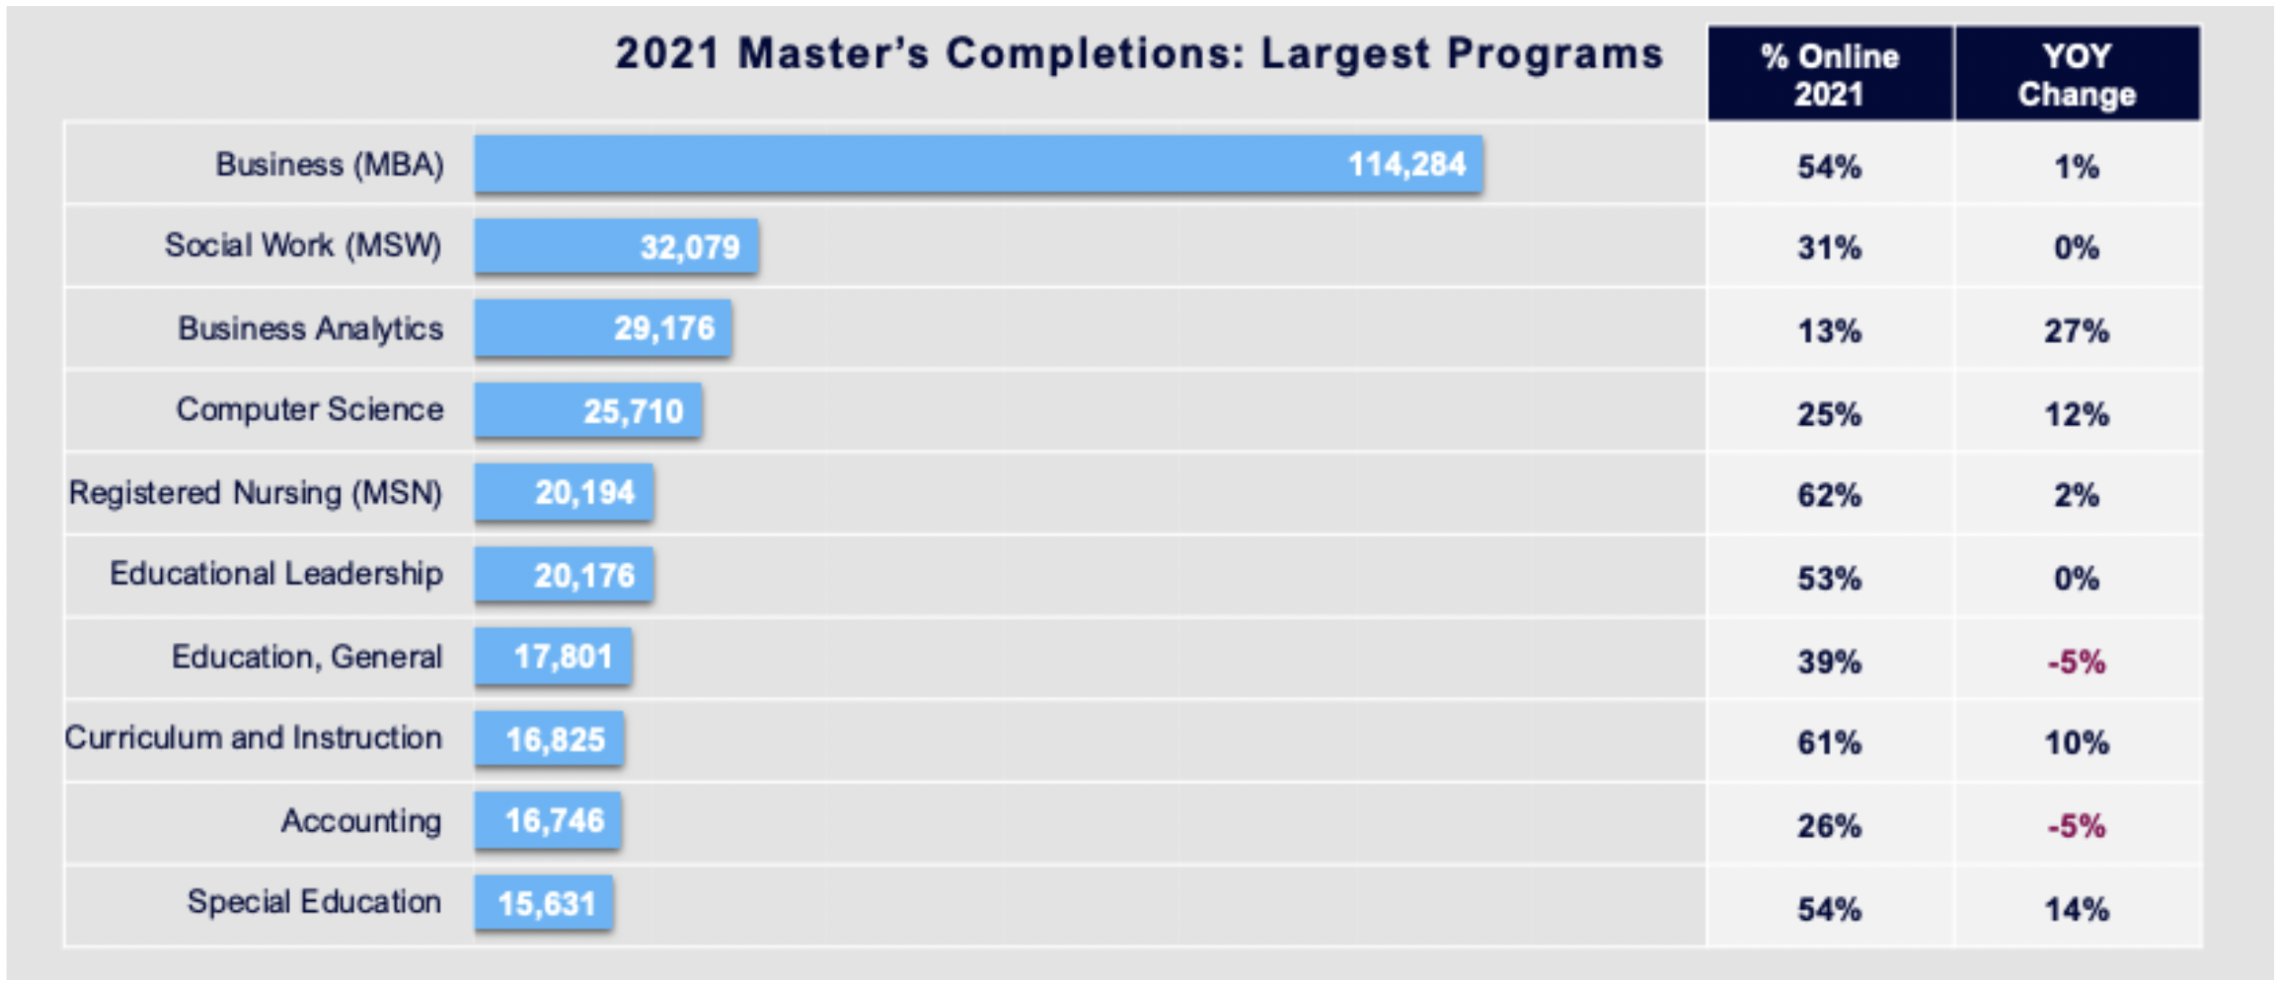 2021 Master's Completions: Largest Programs